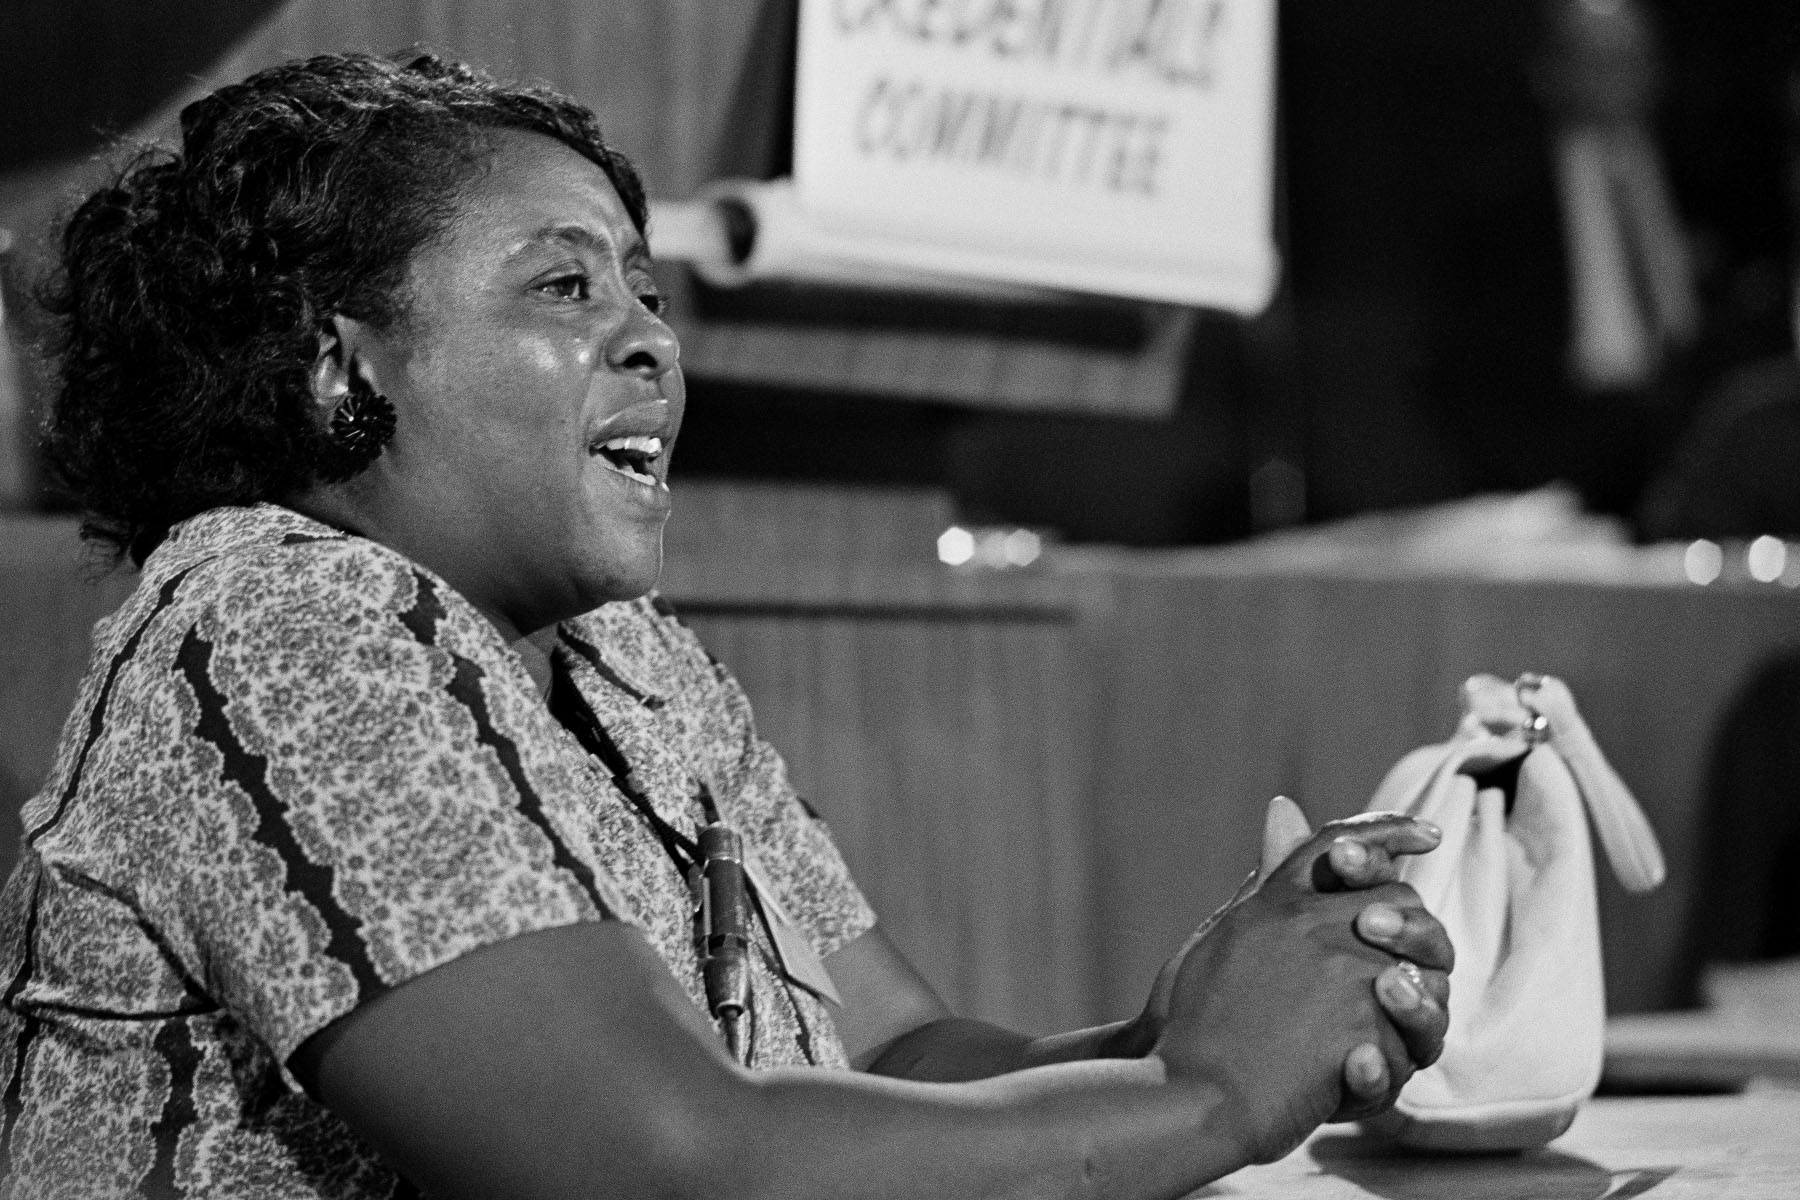 Fannie Lou Hamer speaks before the credentials committee of the Democratic national convention in 1964.